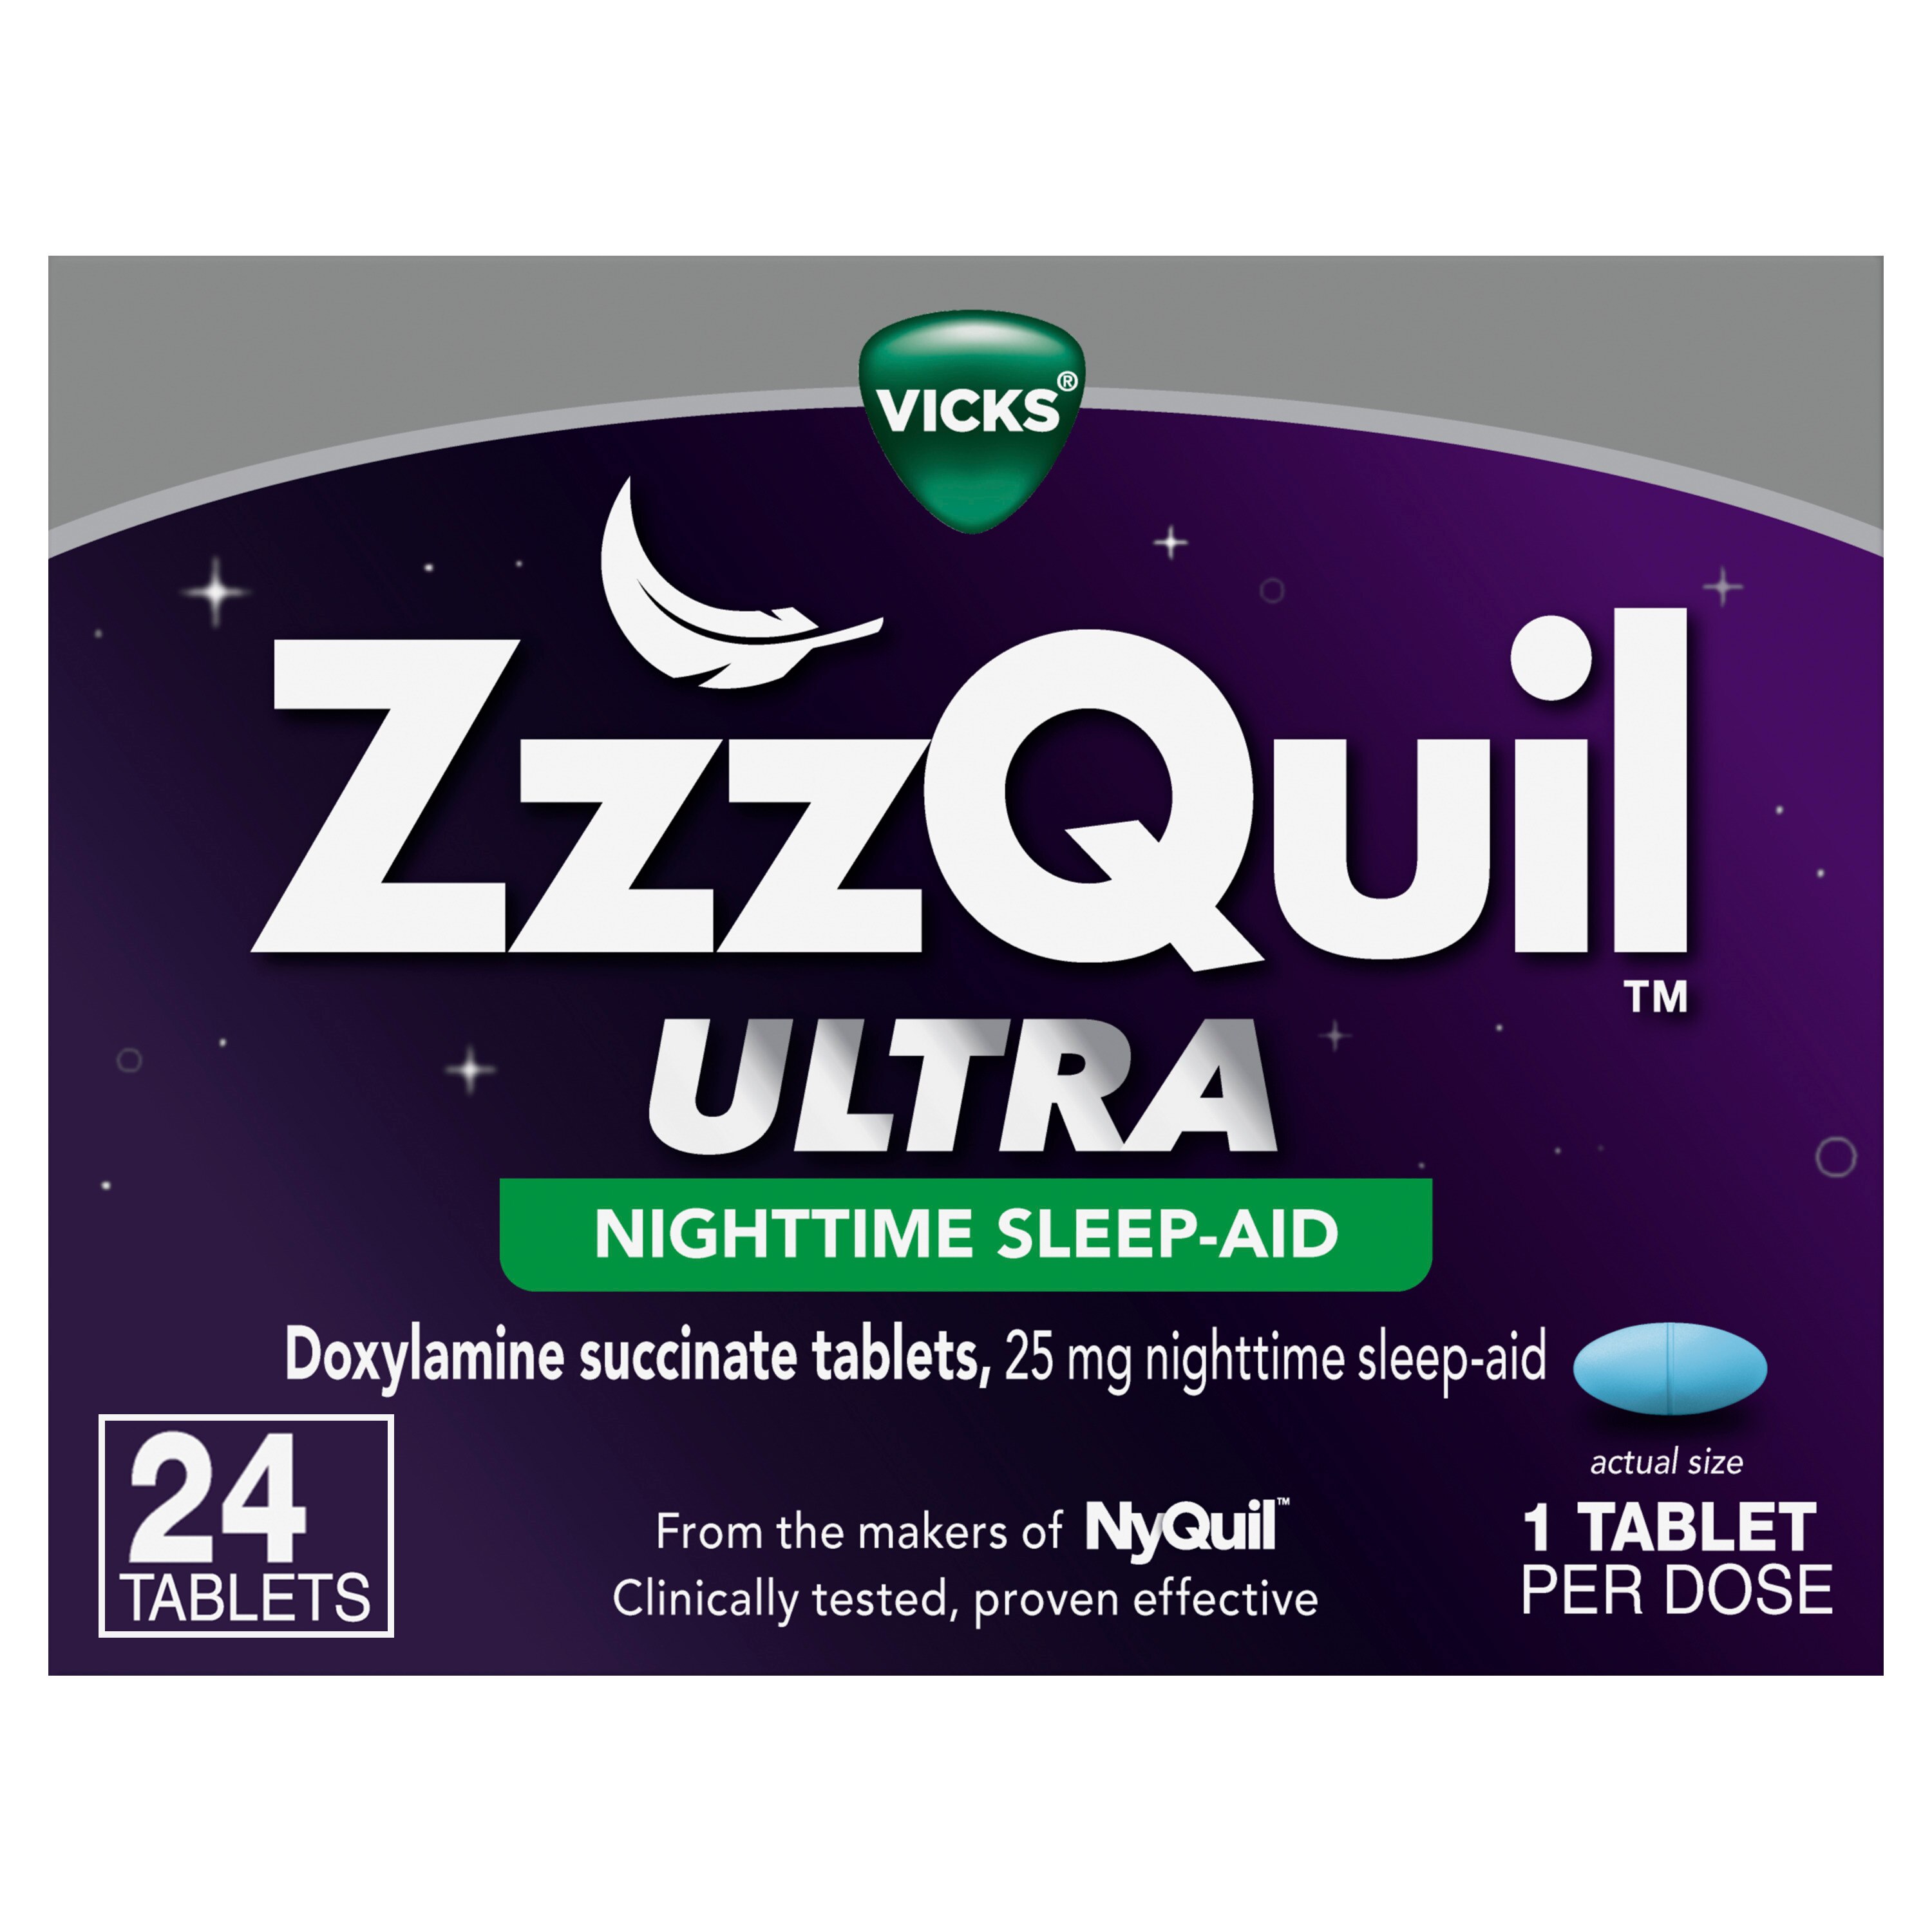 ZzzQuil Ultra Nighttime, Sleep Aid Tablets, Doxlyamine Succinate, For Adult Occassional Sleeplessness, 24 CT